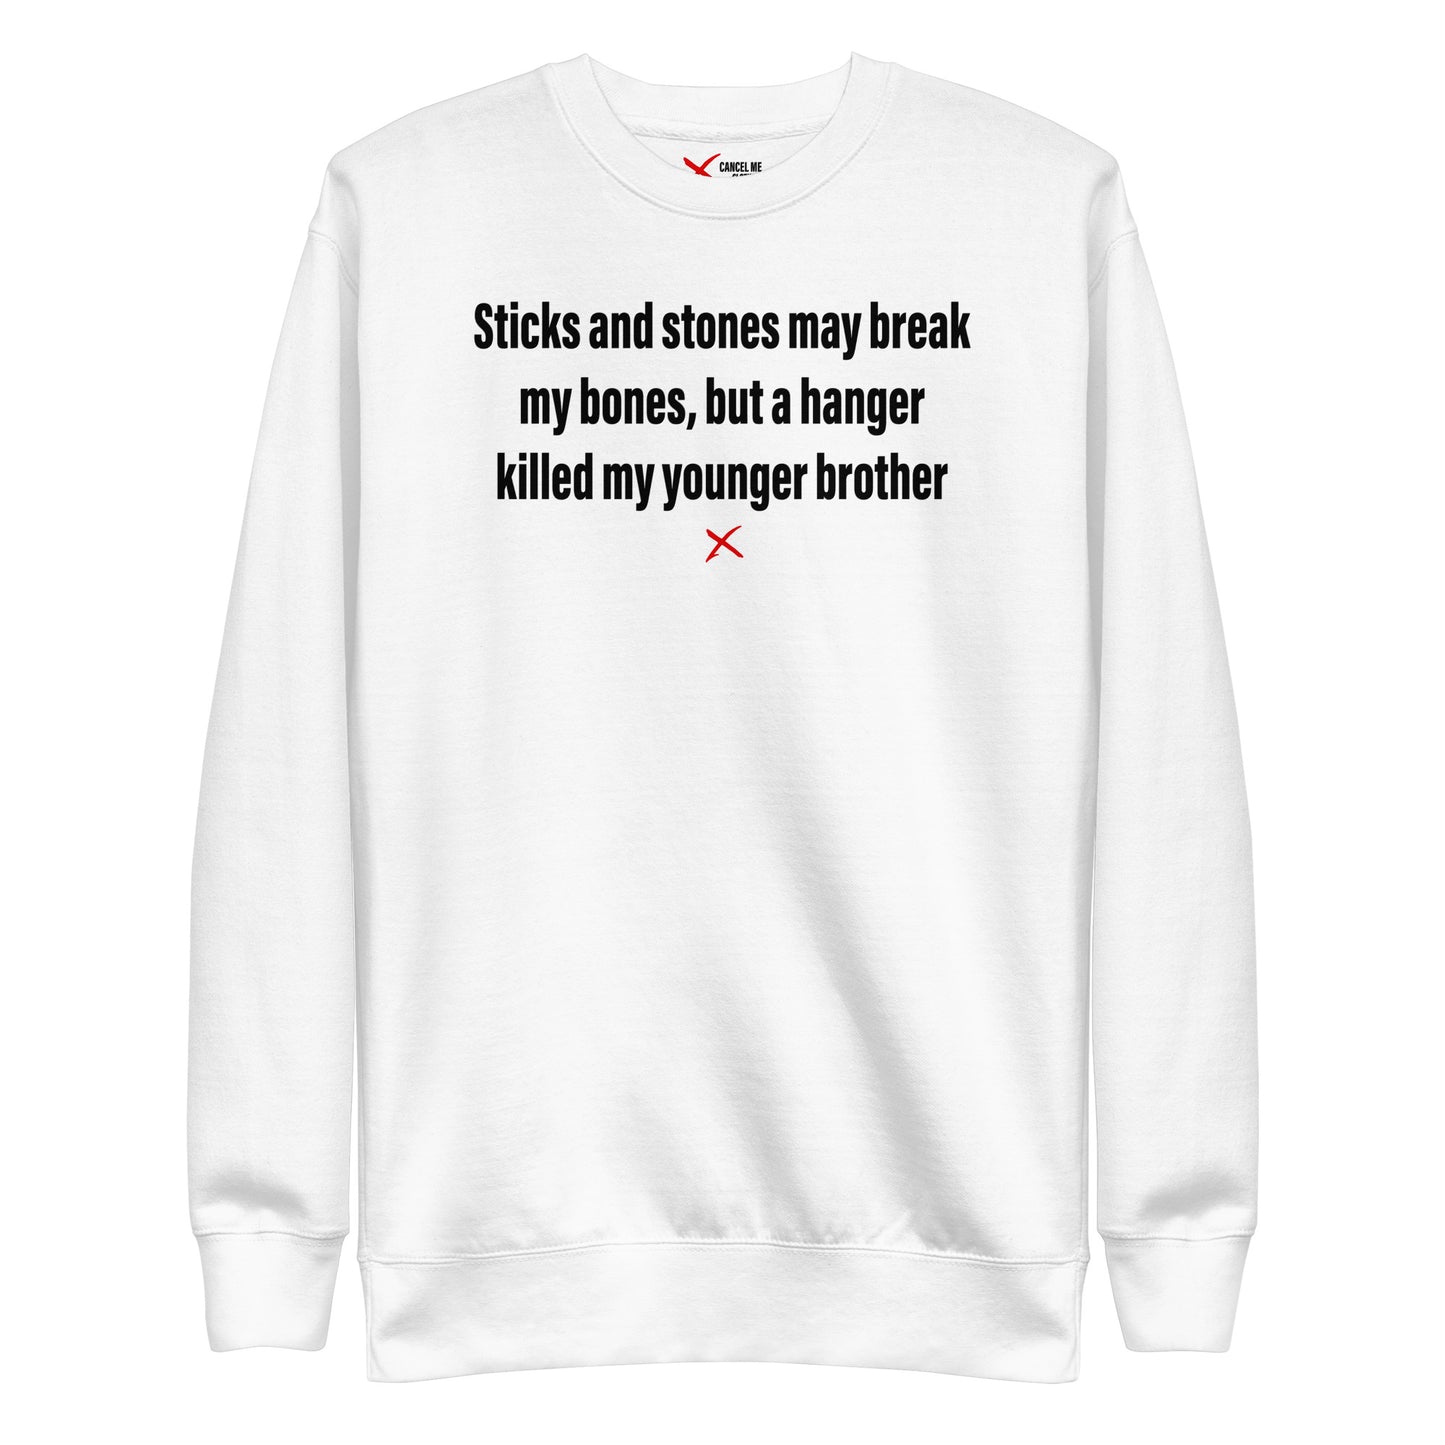 Sticks and stones may break my bones, but a hanger killed my younger brother - Sweatshirt